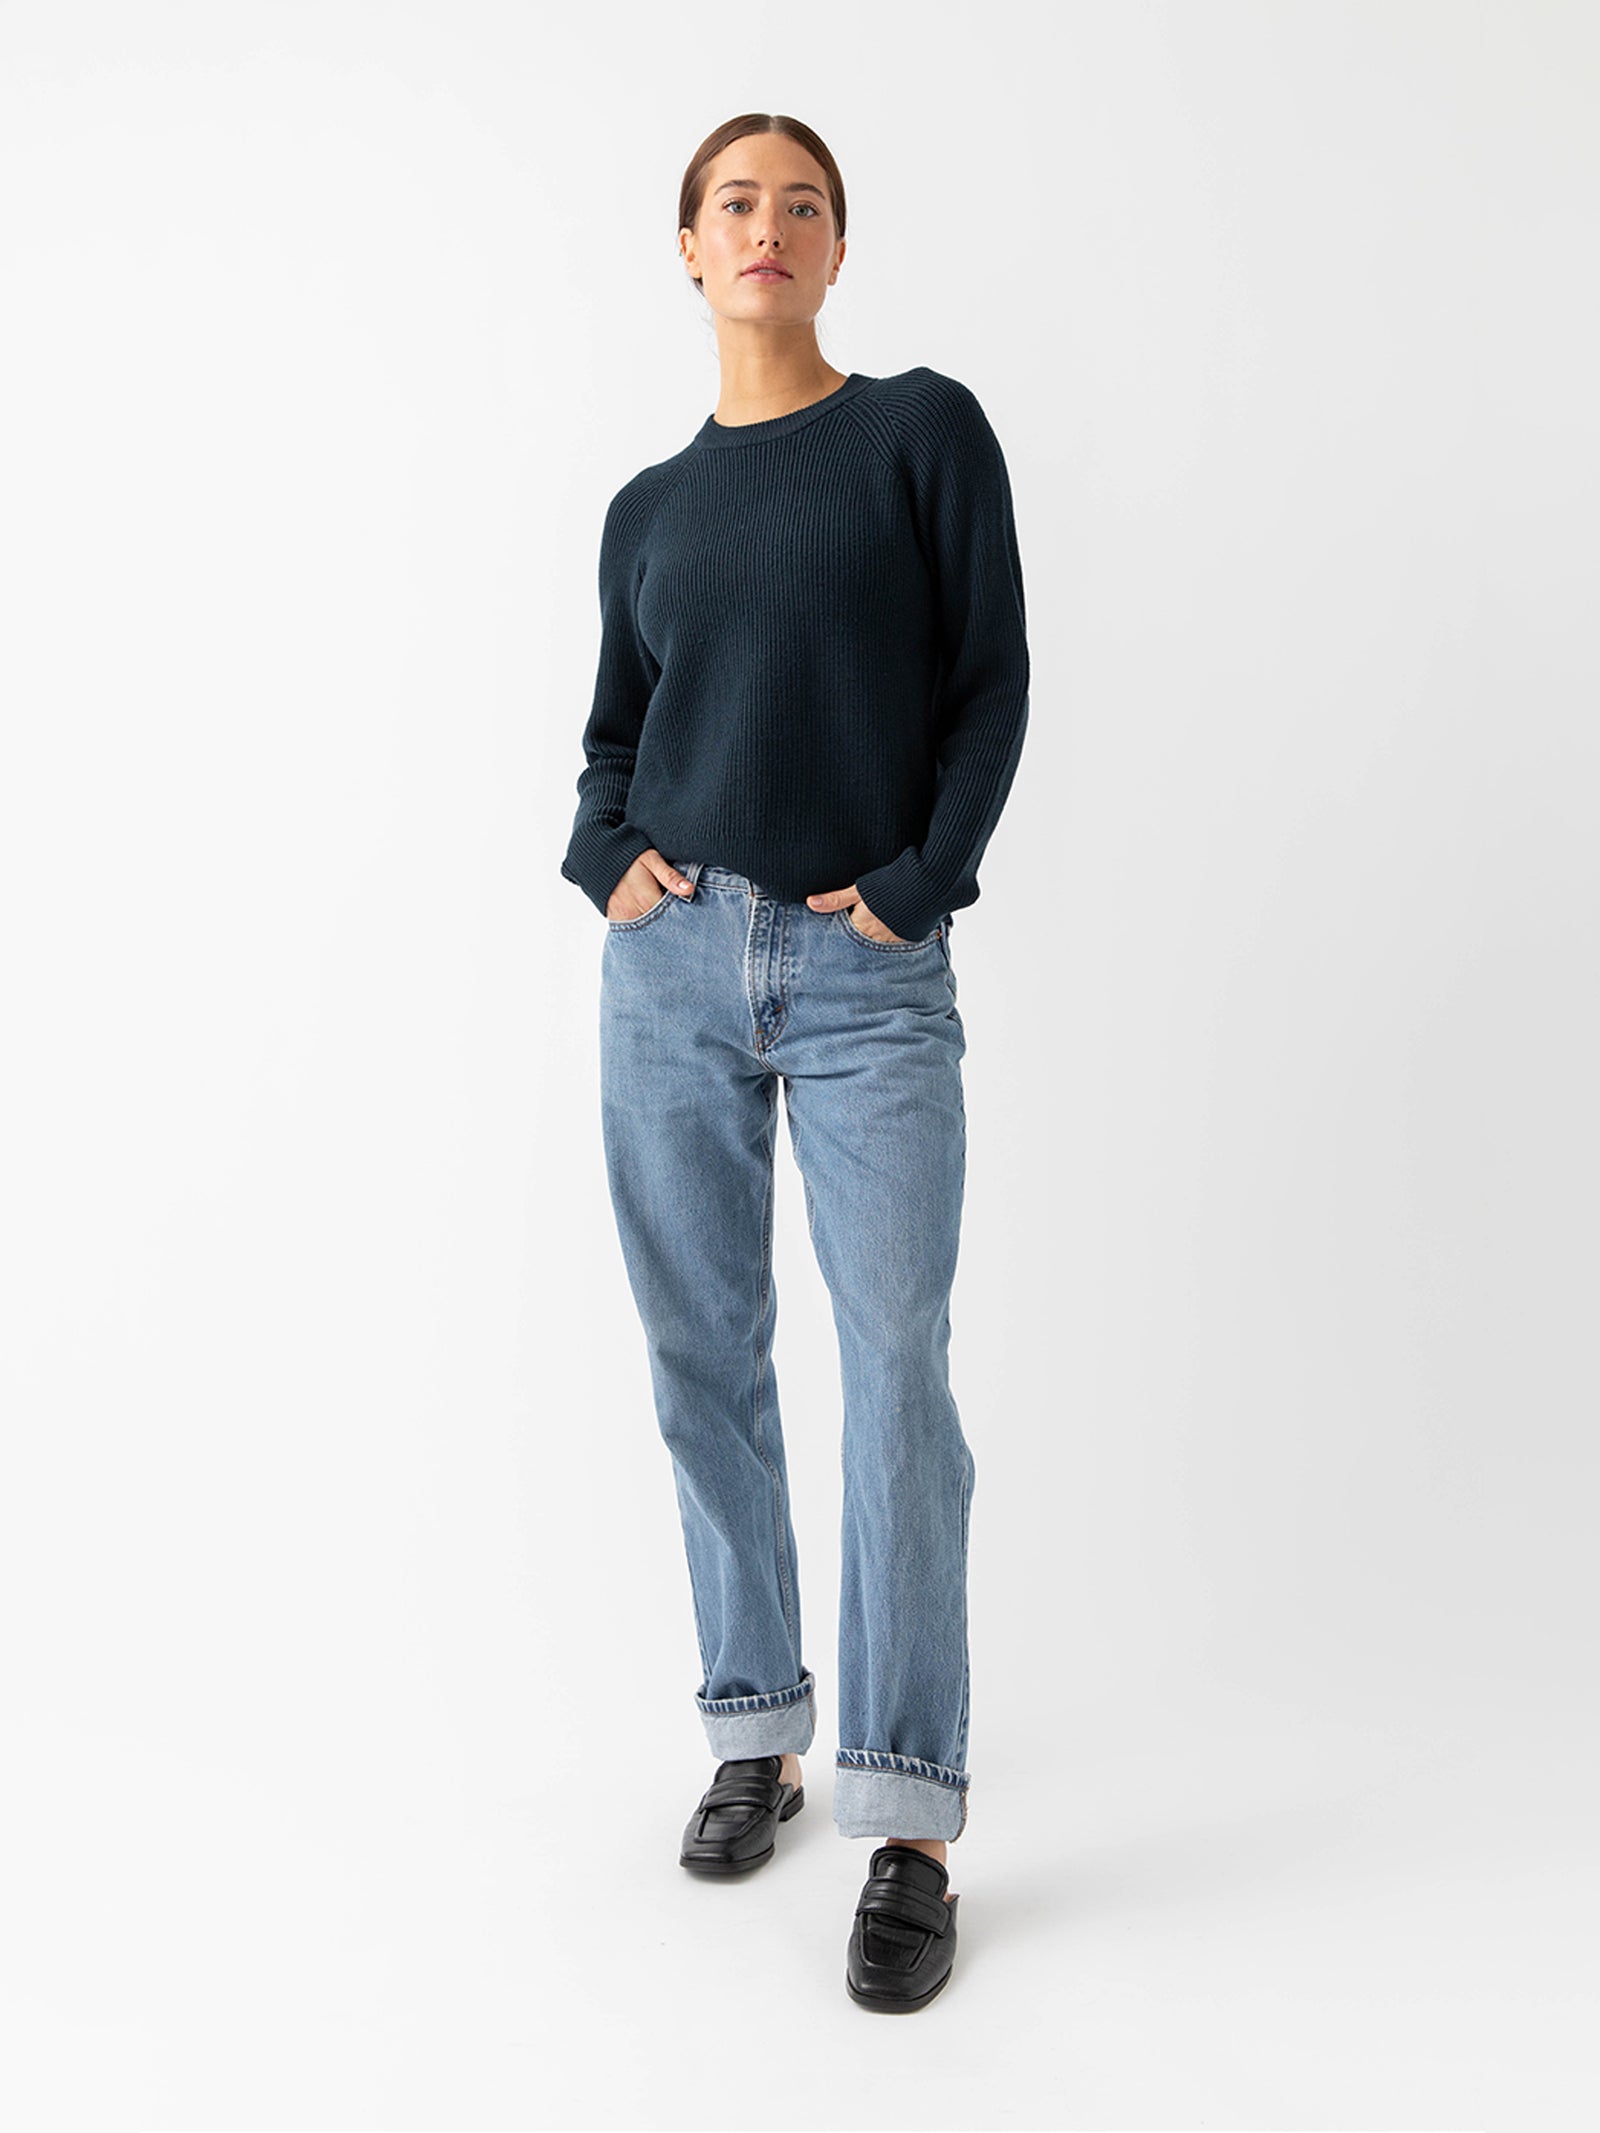 Woman wearing eclipse classic crewneck and jeans with white background 